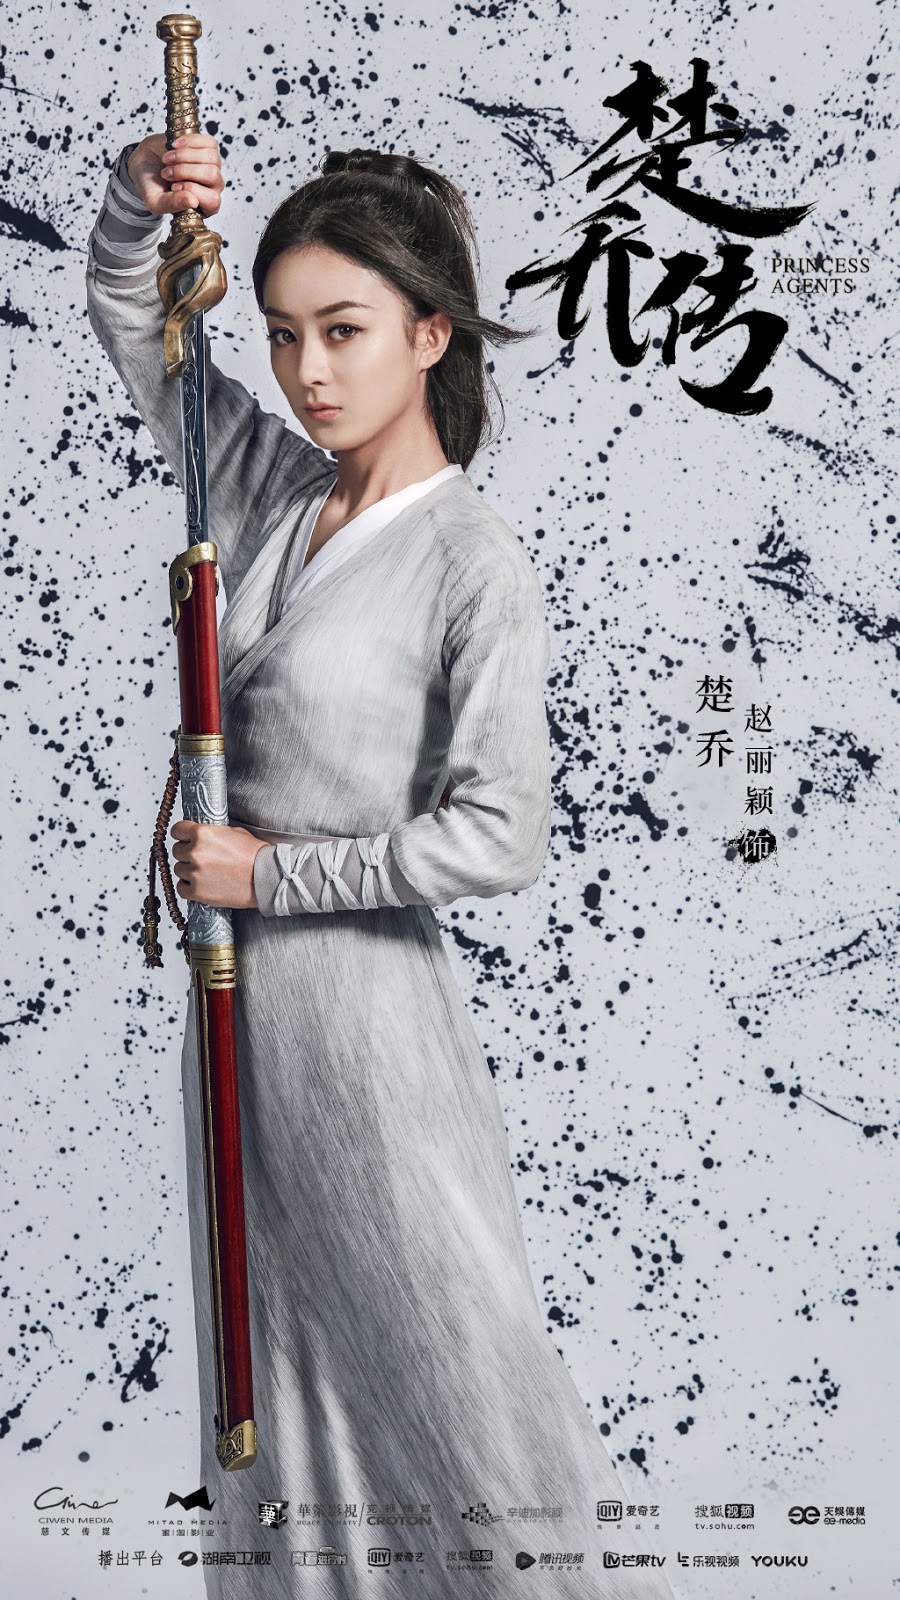 Princess agents drops attention-grabbing posters of its main four leads ...